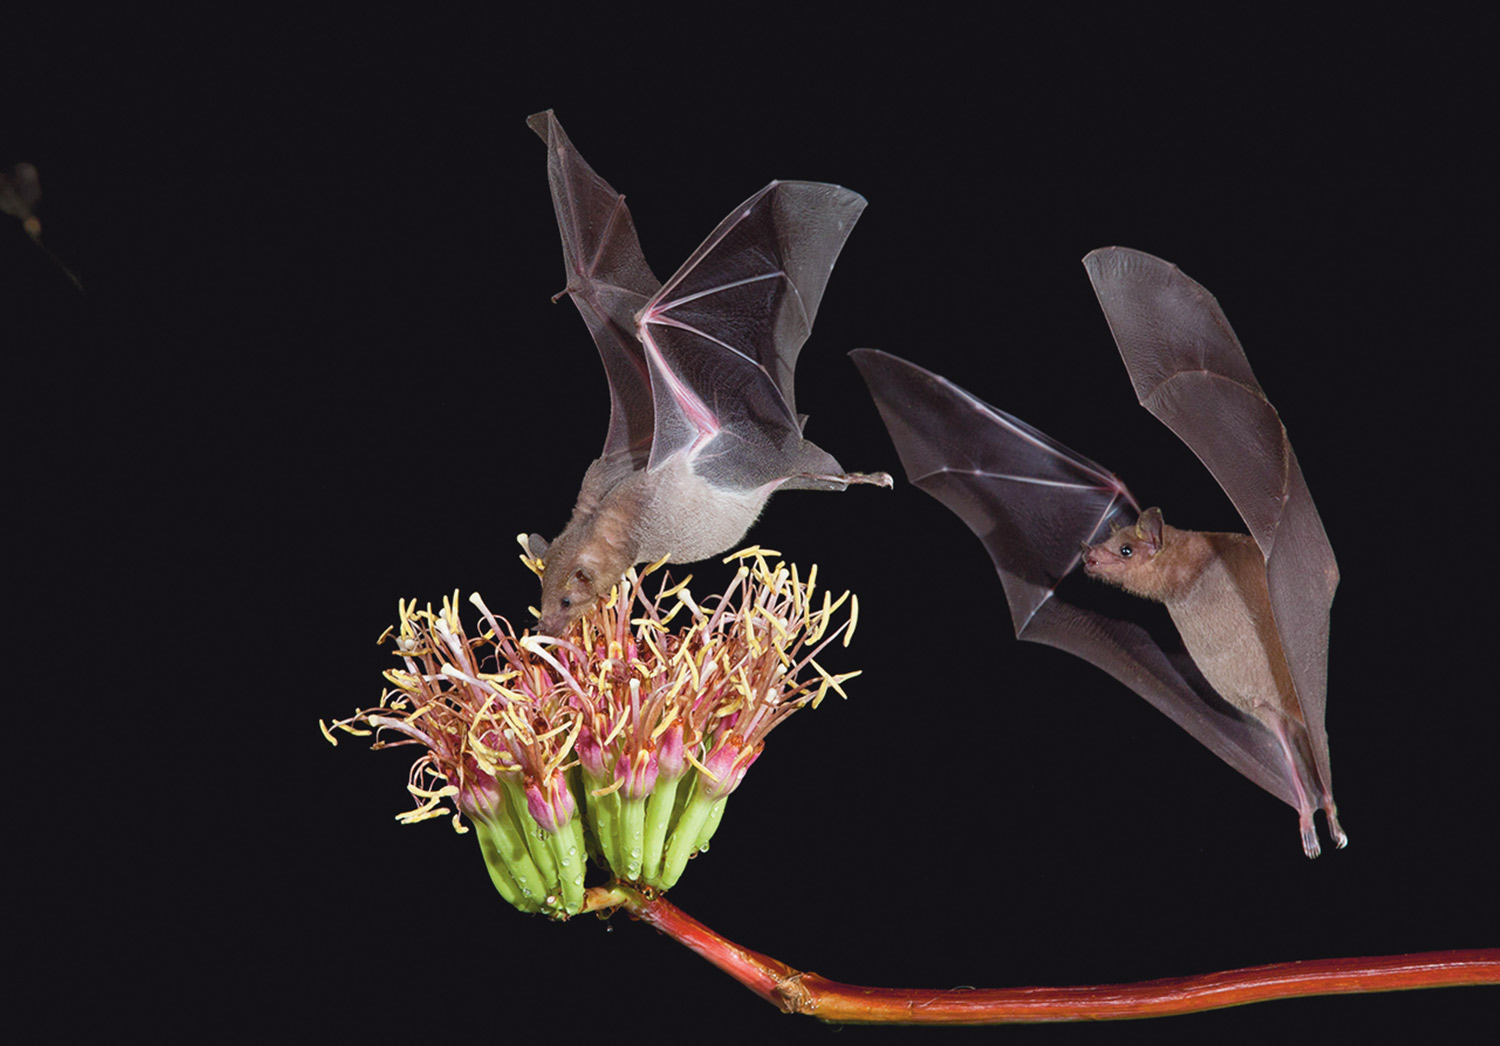 two Lesser long-nosed bats in flight, one dips its head toward the center of a flower bundle on the end of a branch while the other floats close behind